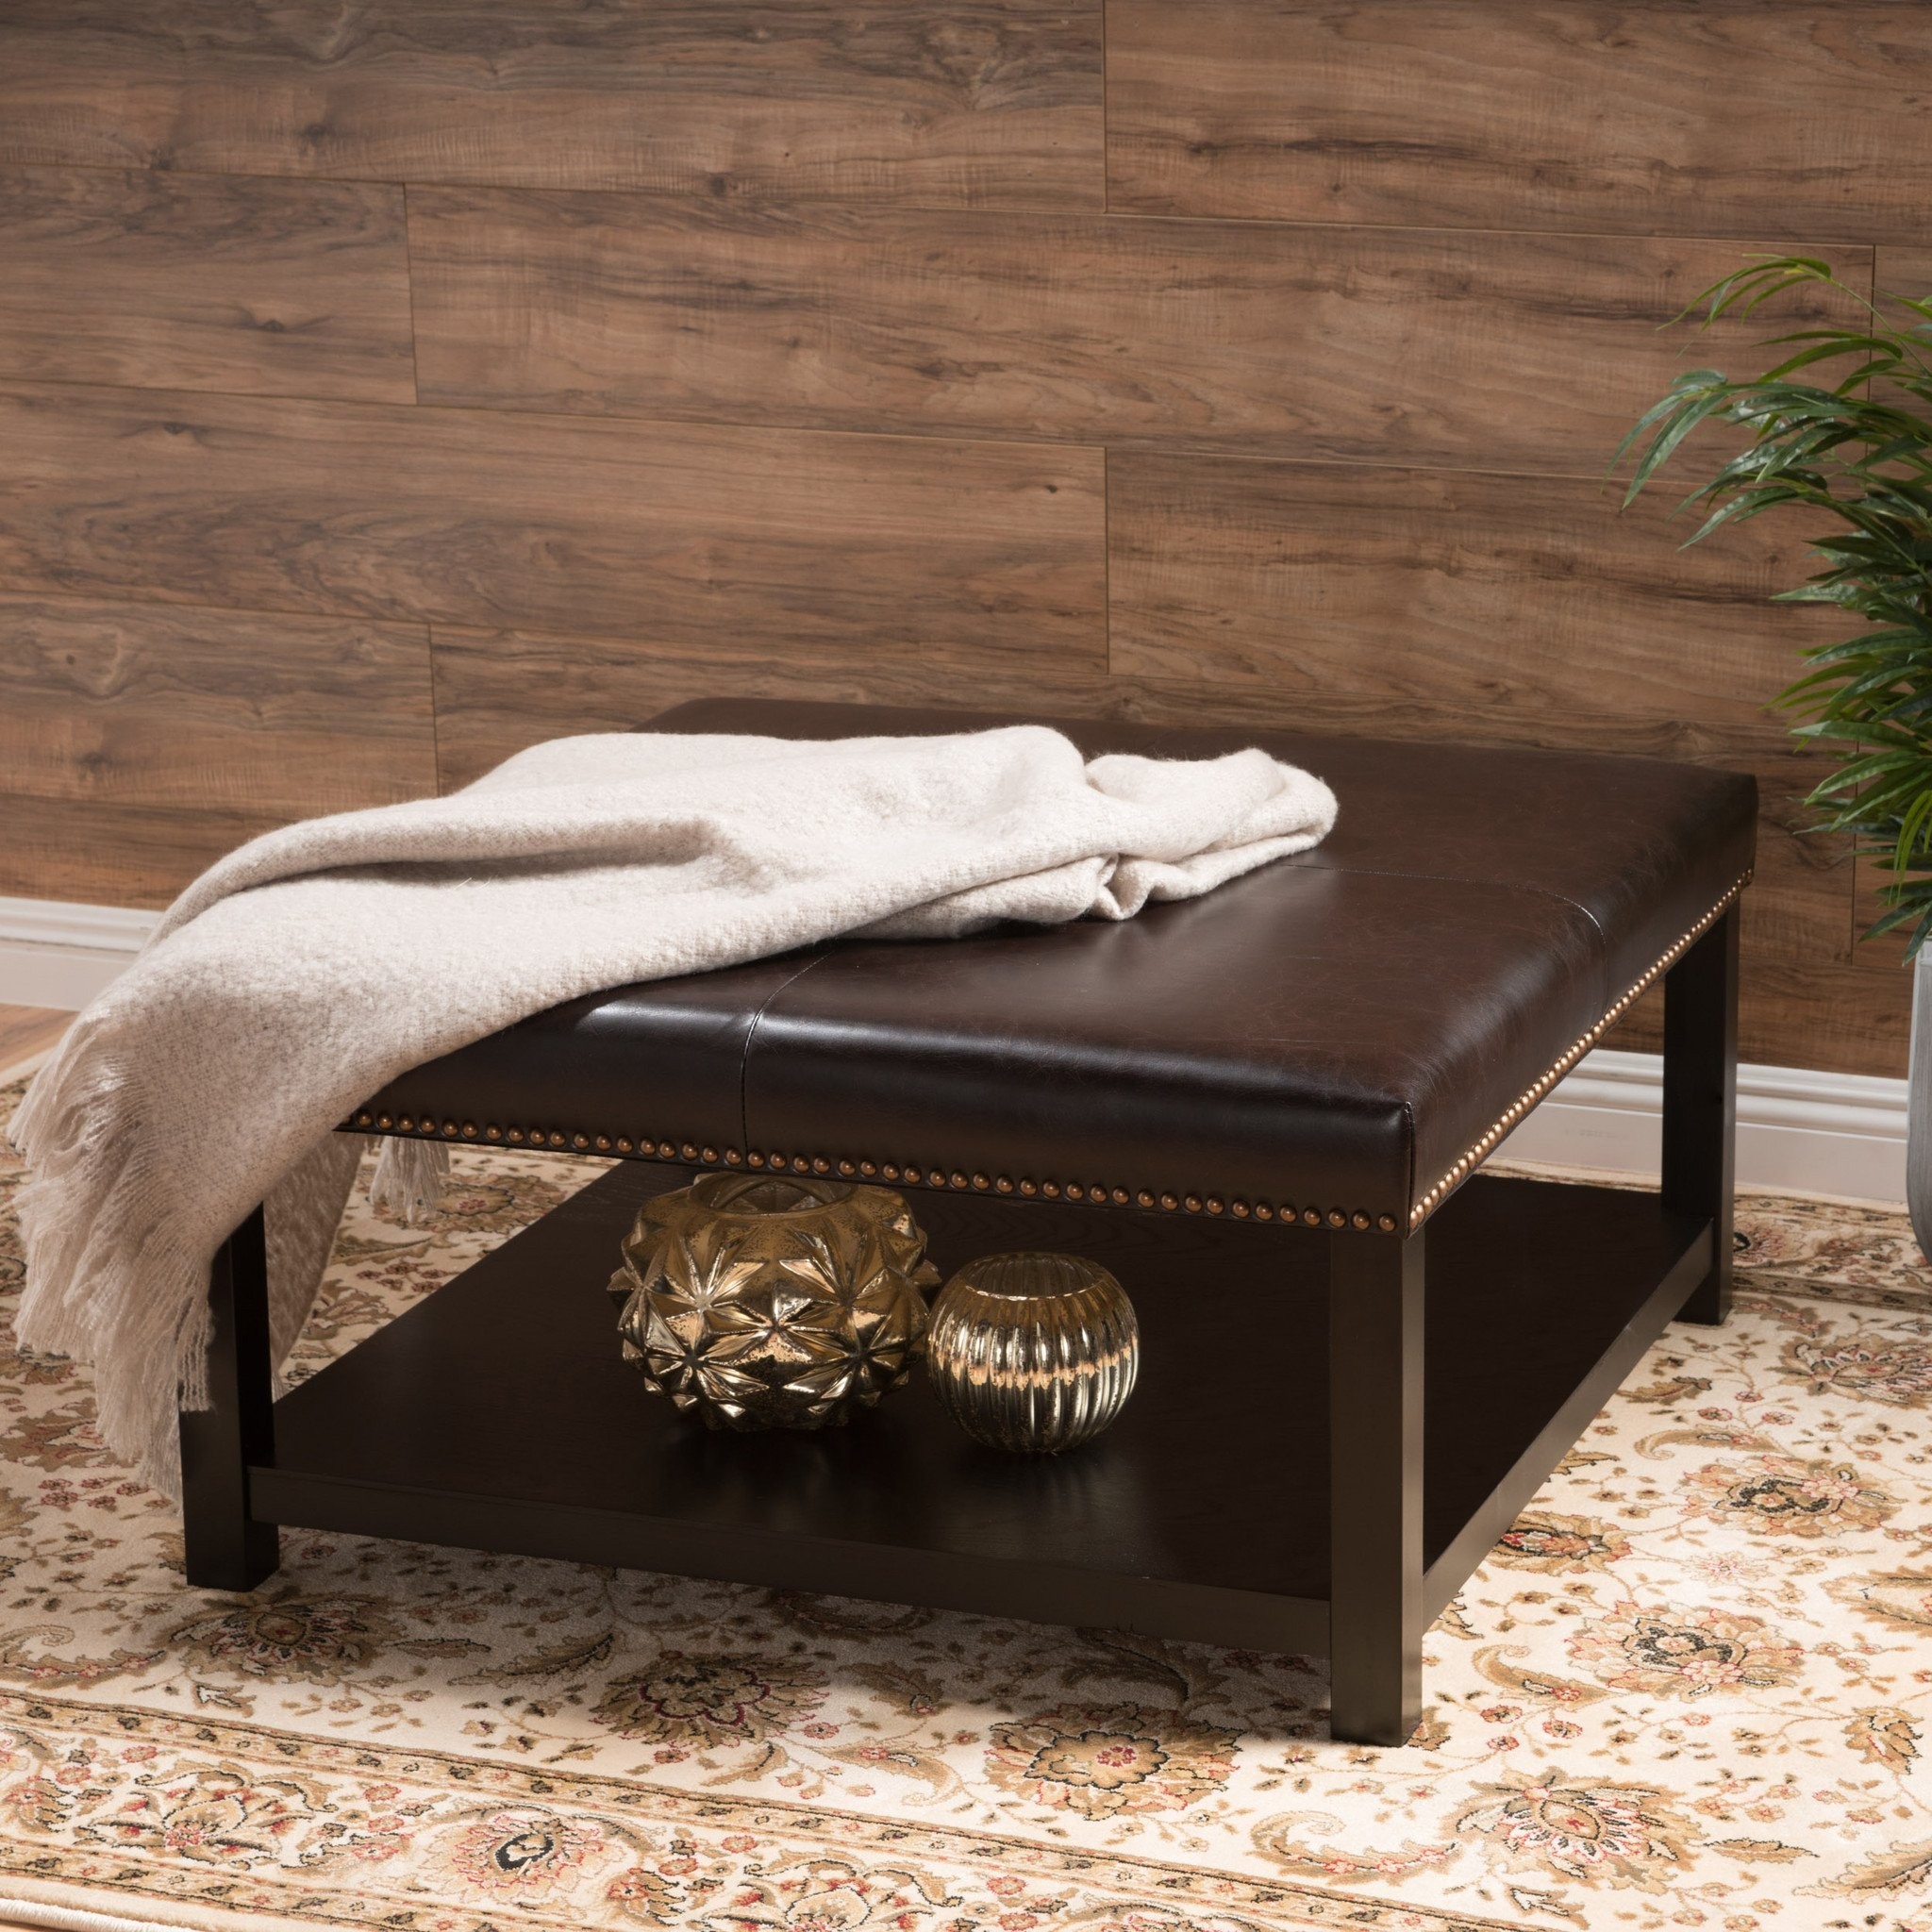 Kelapith Contemporary Leather Ottoman Brown Bench...